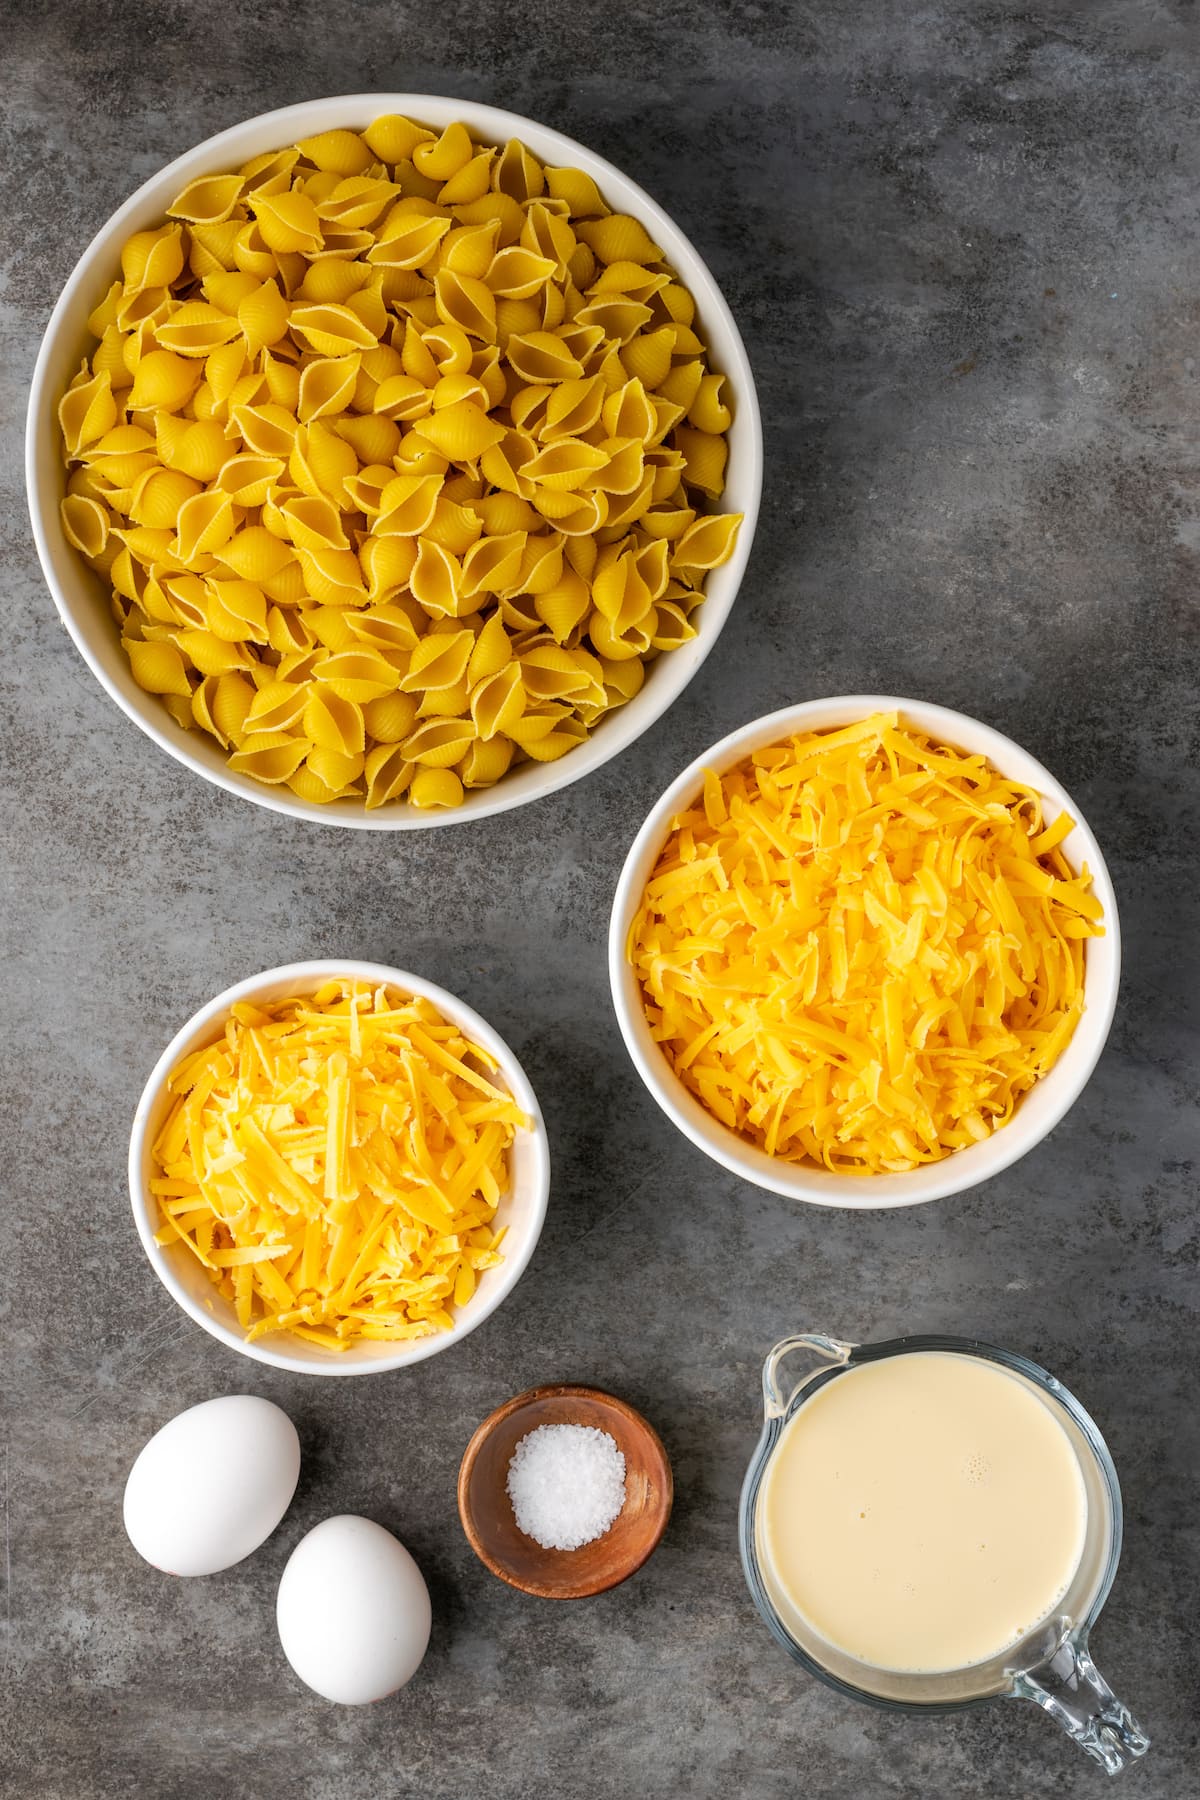 Ingredients for easy stovetop mac and cheese.